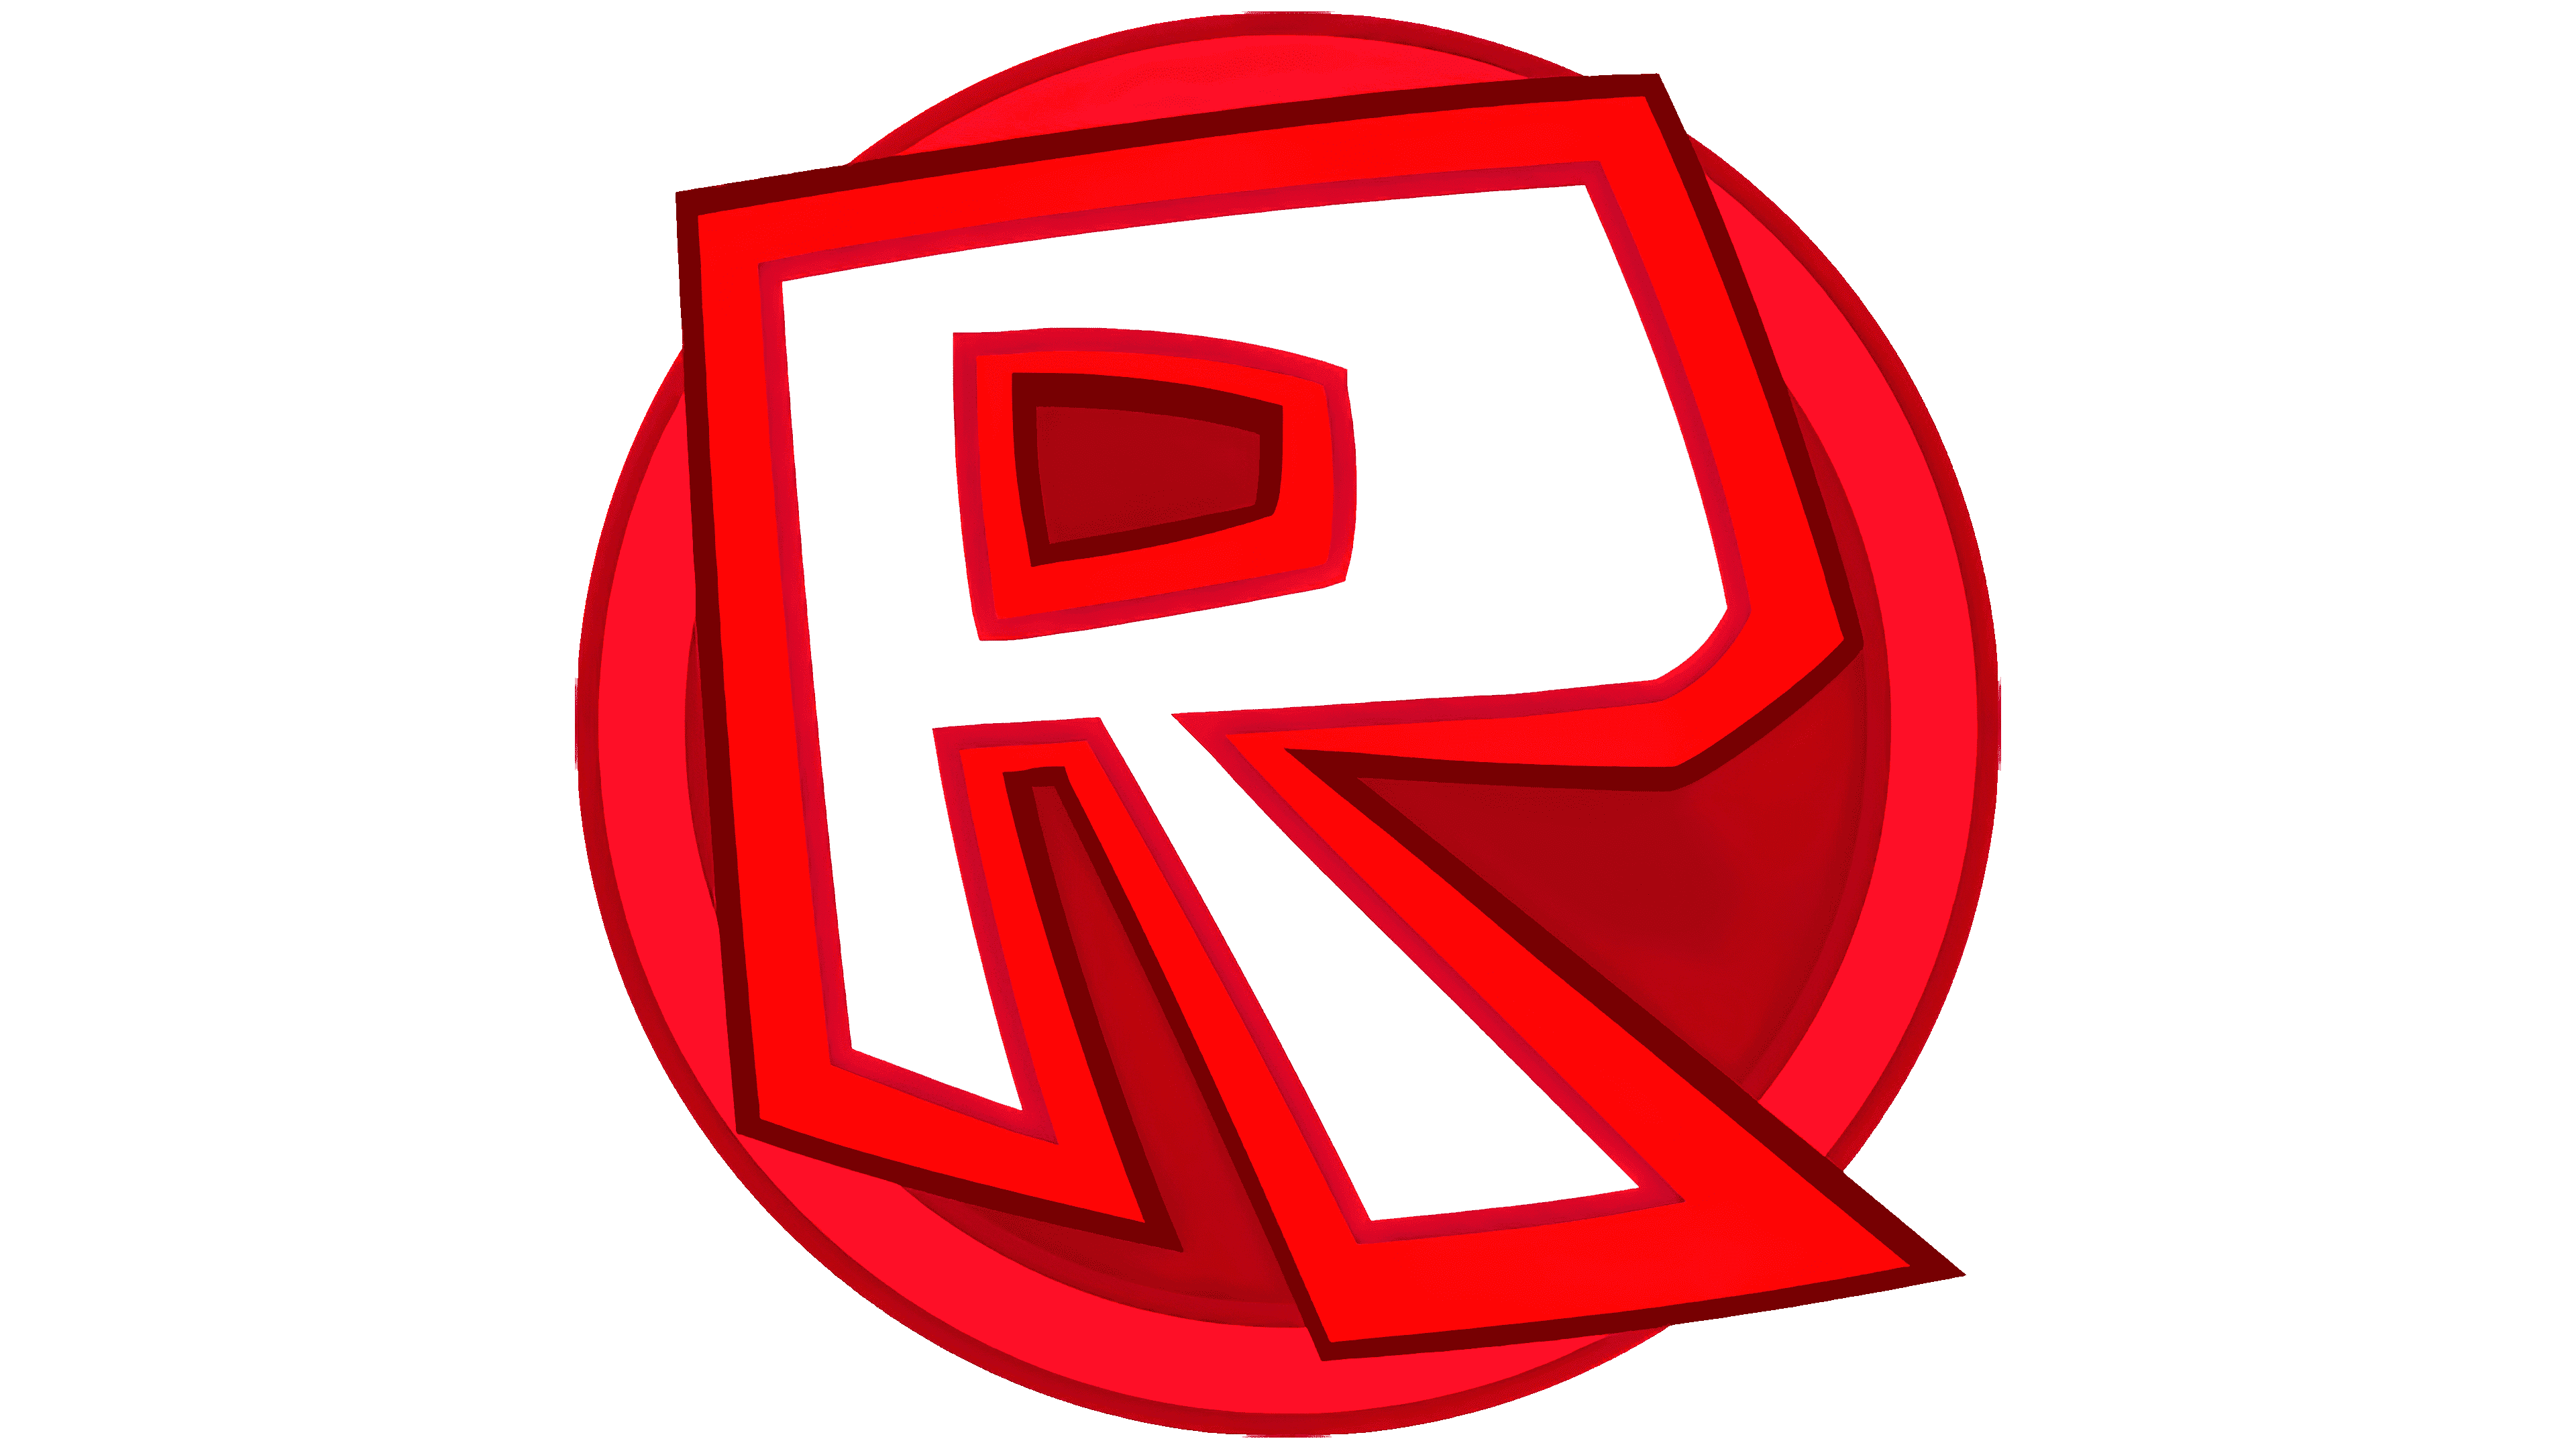 File:Roblox logo 2015.png - Wikimedia Commons